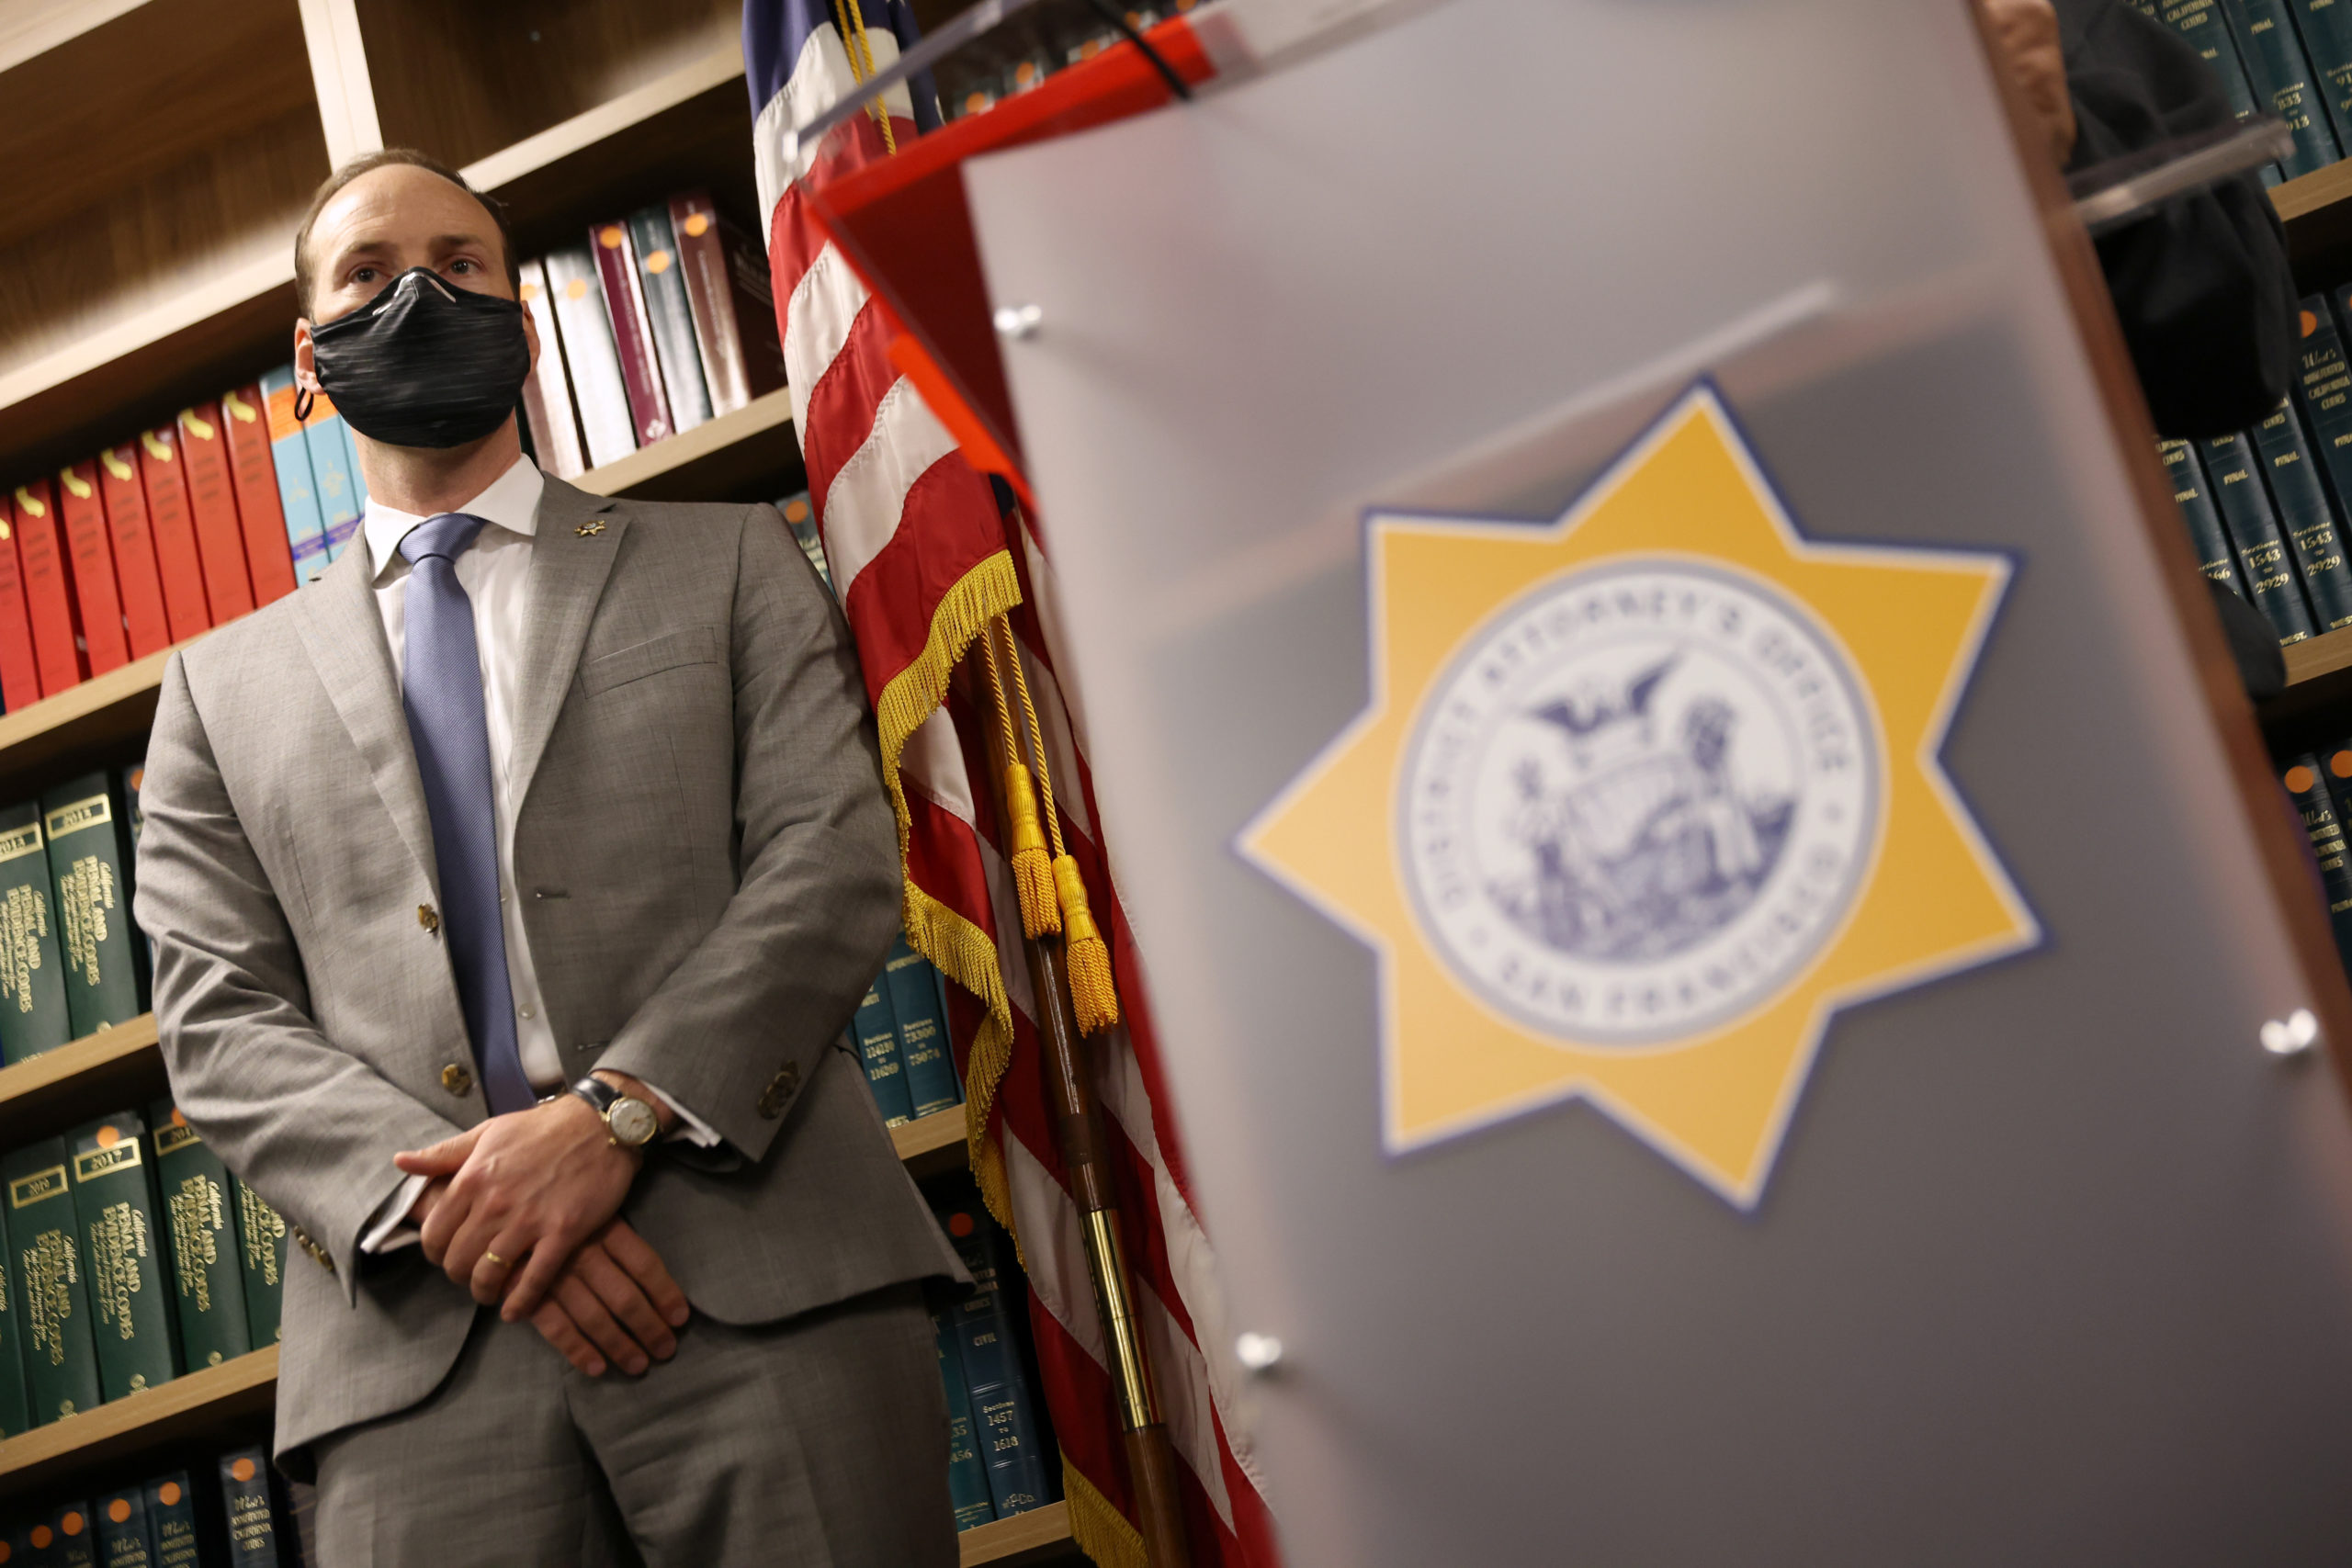 San Francisco District Attorney Chesa Boudin looks on during a press conference at his office on February 15, 2022 in San Francisco, California. San Francisco D.A. Chesa Boudin spoke out against the San Francisco Police Department's practice of logging DNA evidence from rape kits into their crime database to use as evidence in other crimes. (Photo by Justin Sullivan/Getty Images)